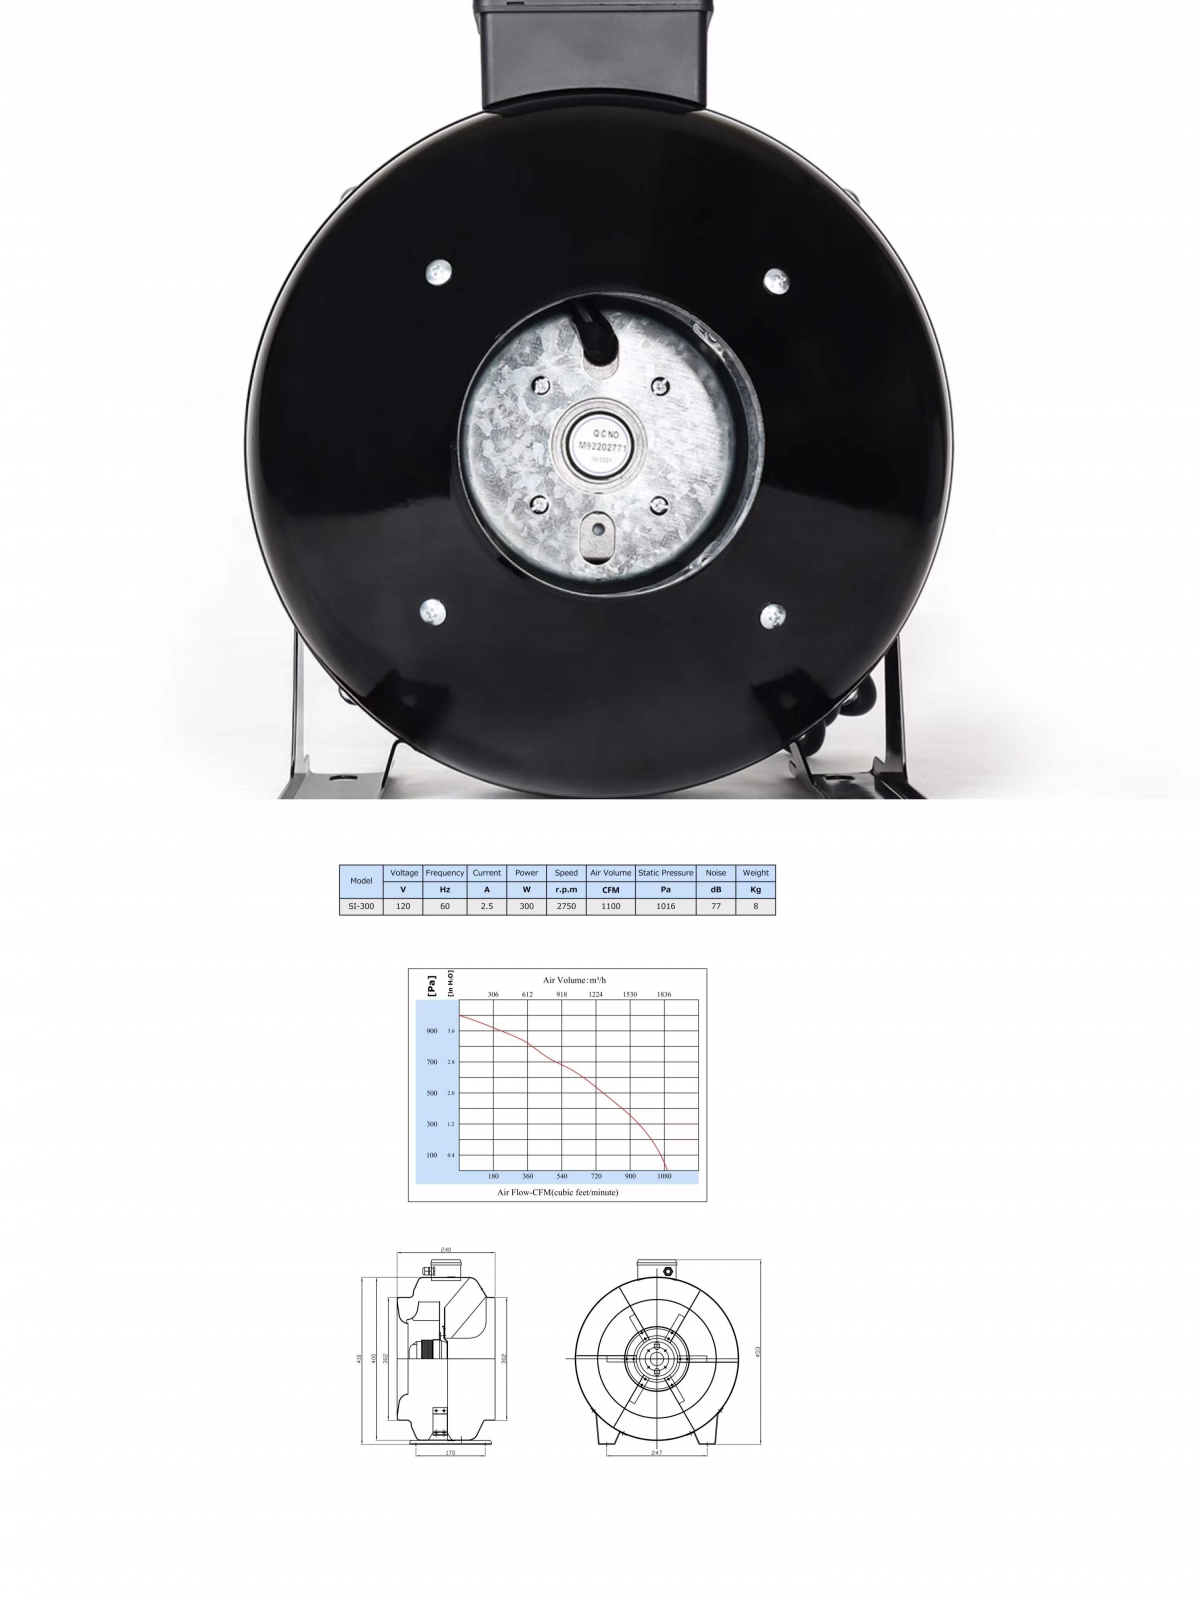 Duct in-line fans -China inline duct fans manufacuturer in Changzhou which is the centre of the motors-SUNLIGHT BLOWER,Centrifugal Fans, Inline Fans,Motors,Backward curved centrifugal fans ,Forward curved centrifugal fans ,inlet fans, EC fans